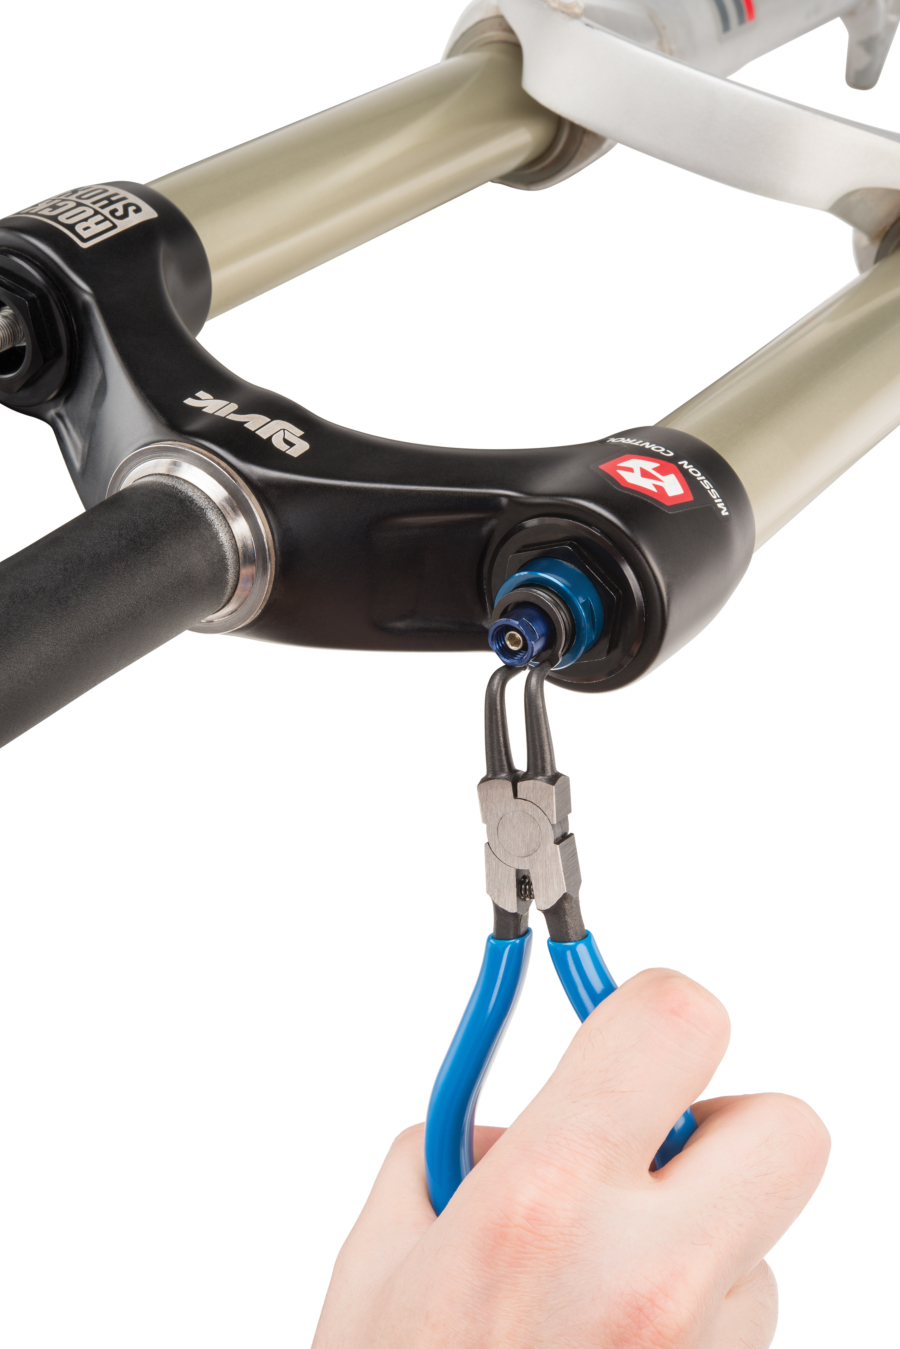 The Park Tool RP-2 1.3mm Internal Retaining Ring Pliers removing lockring from RockShox® lockout, enlarged